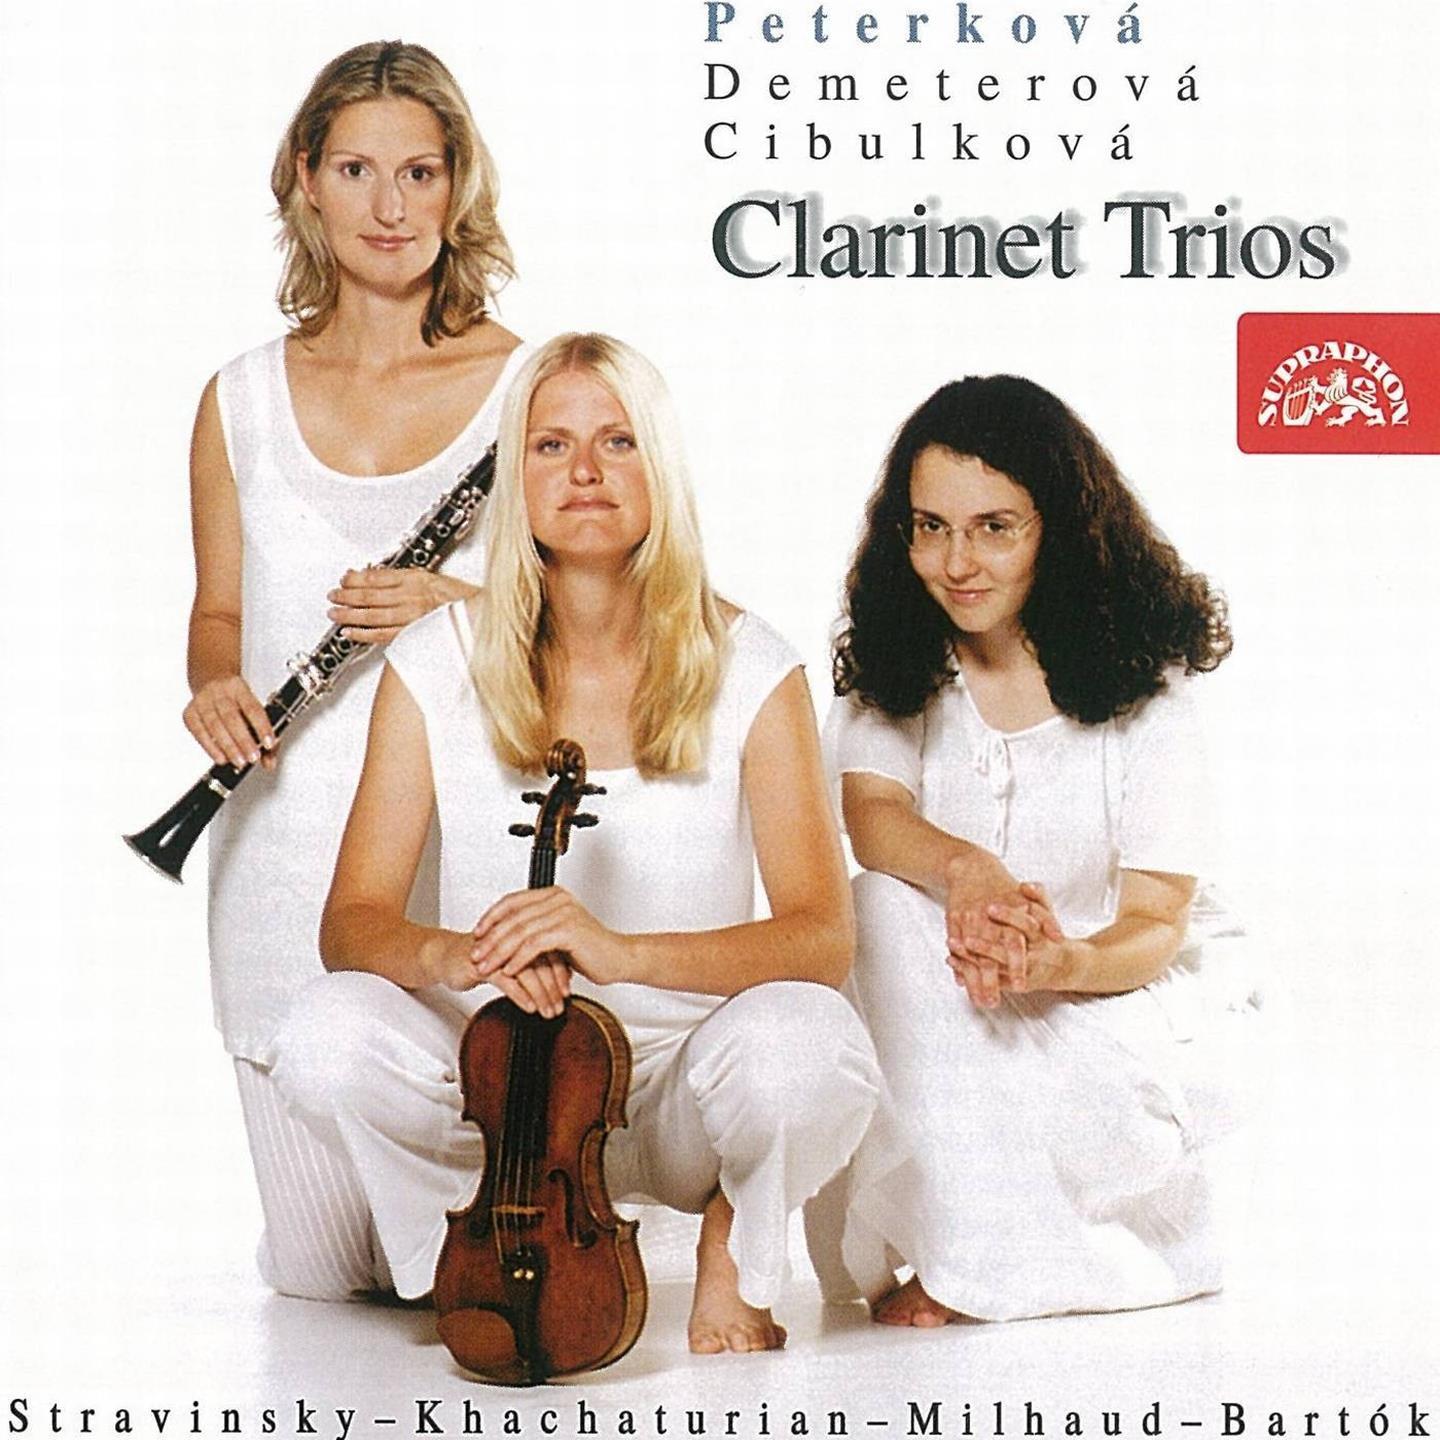 Suite for Violin, Clarinet and Piano, Op. 157b: II. Divertissement. Anime